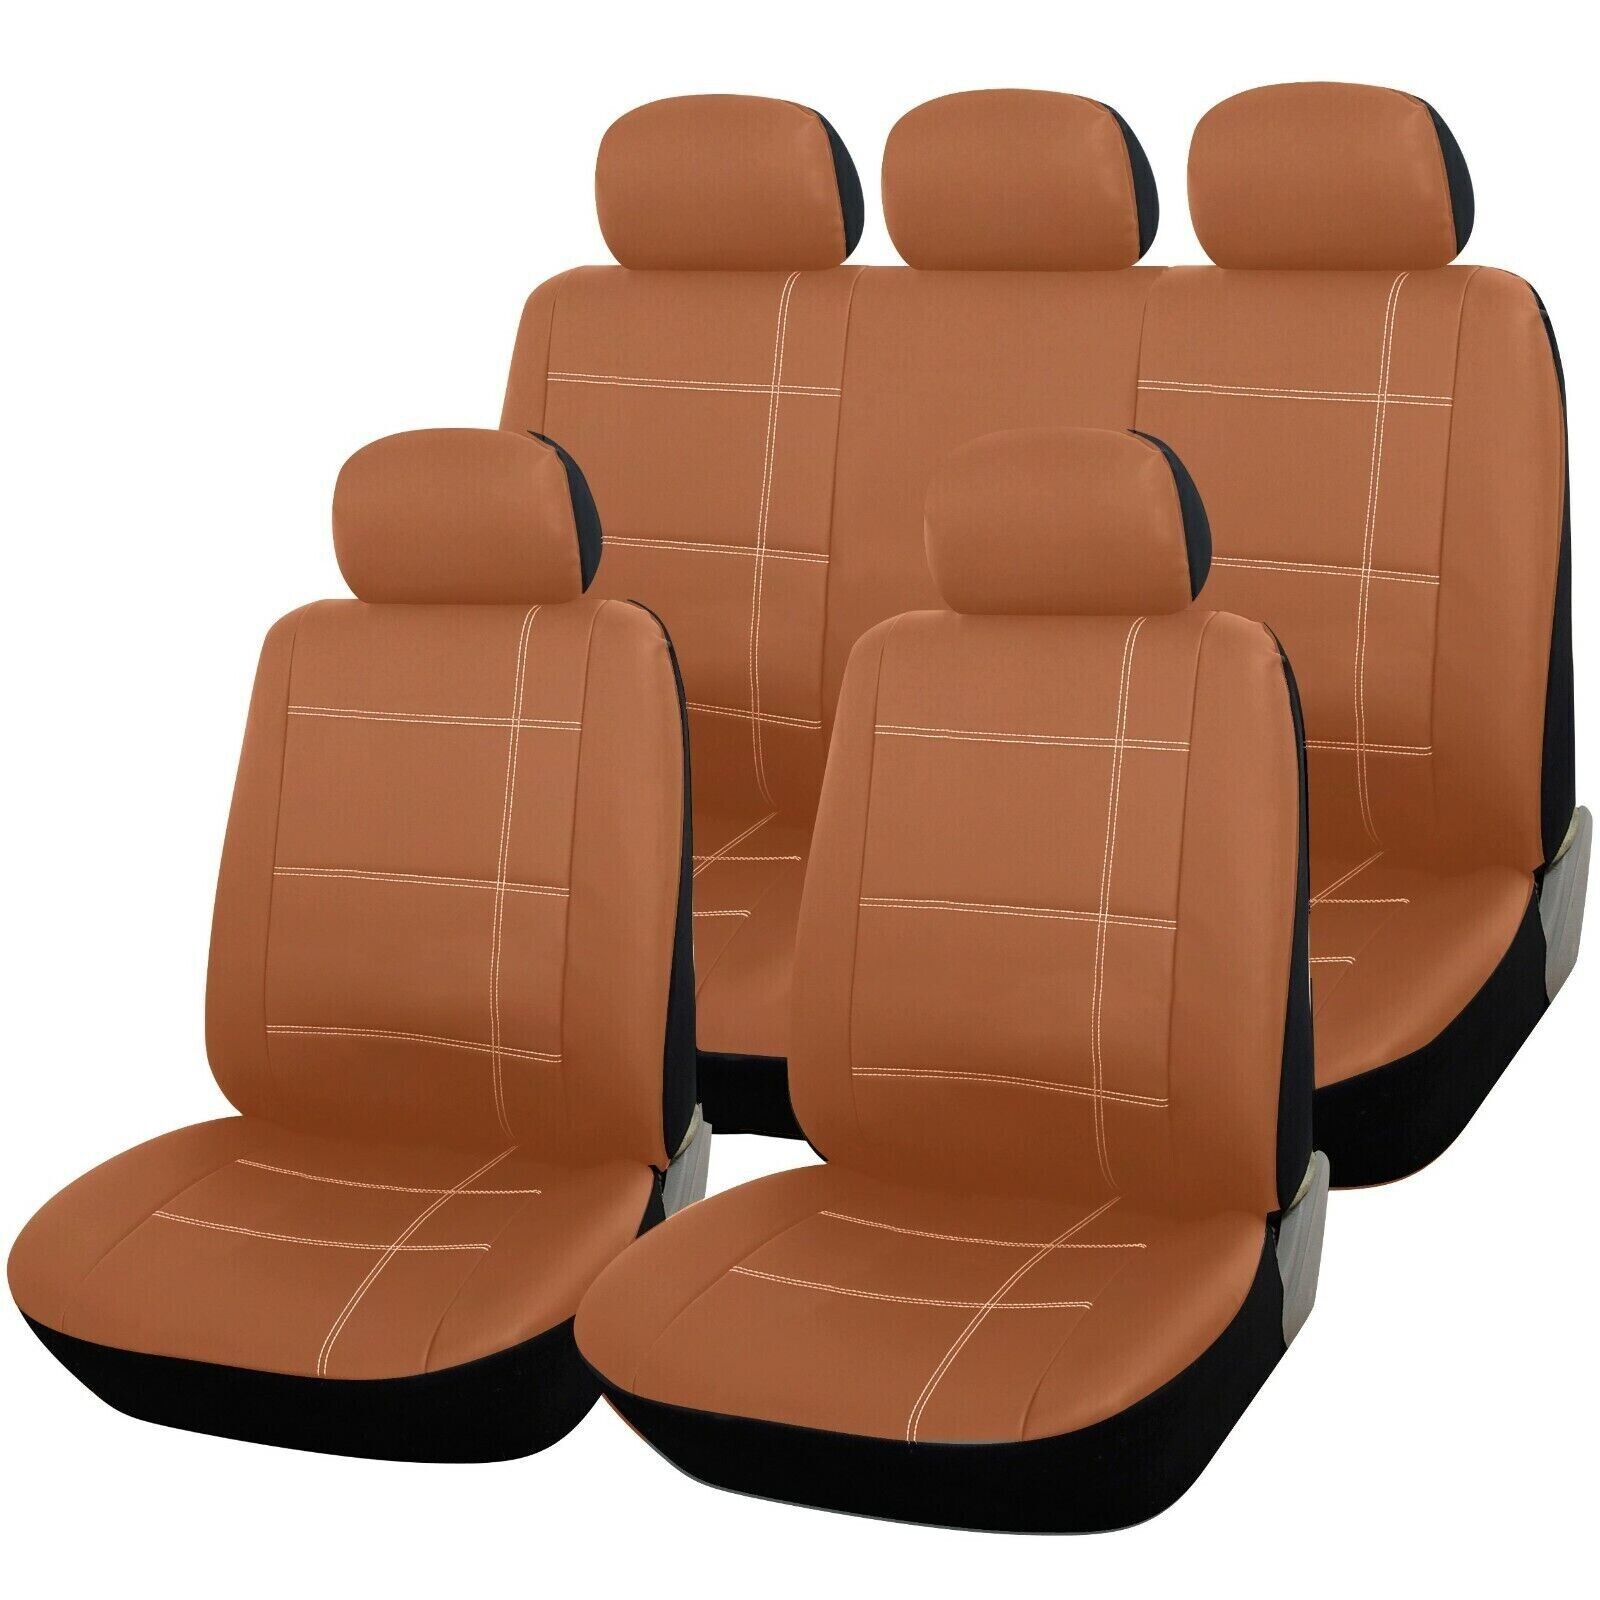 Car Seat Covers Tan Leather Look Full Set 9pc Front Rear For Renault Clio